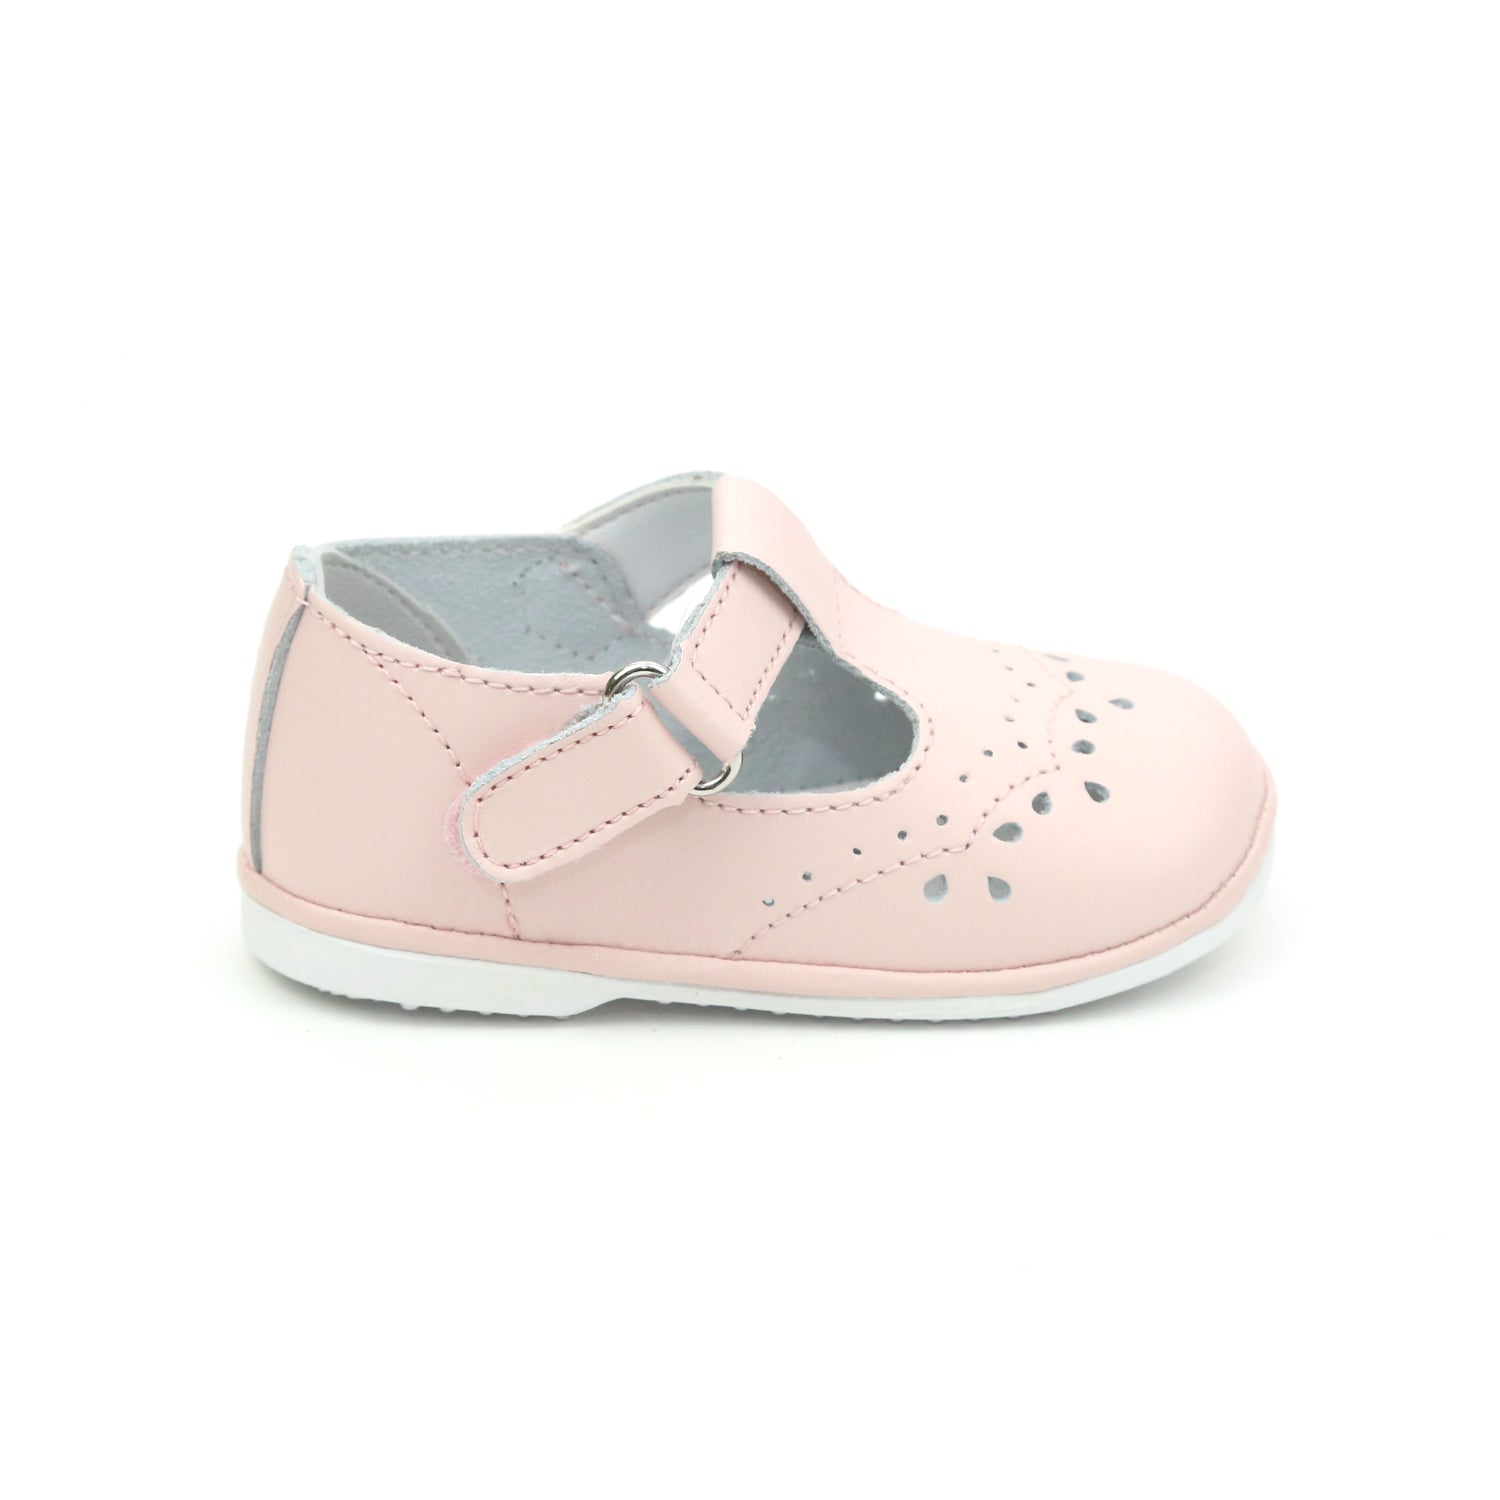 leather baby mary jane shoes